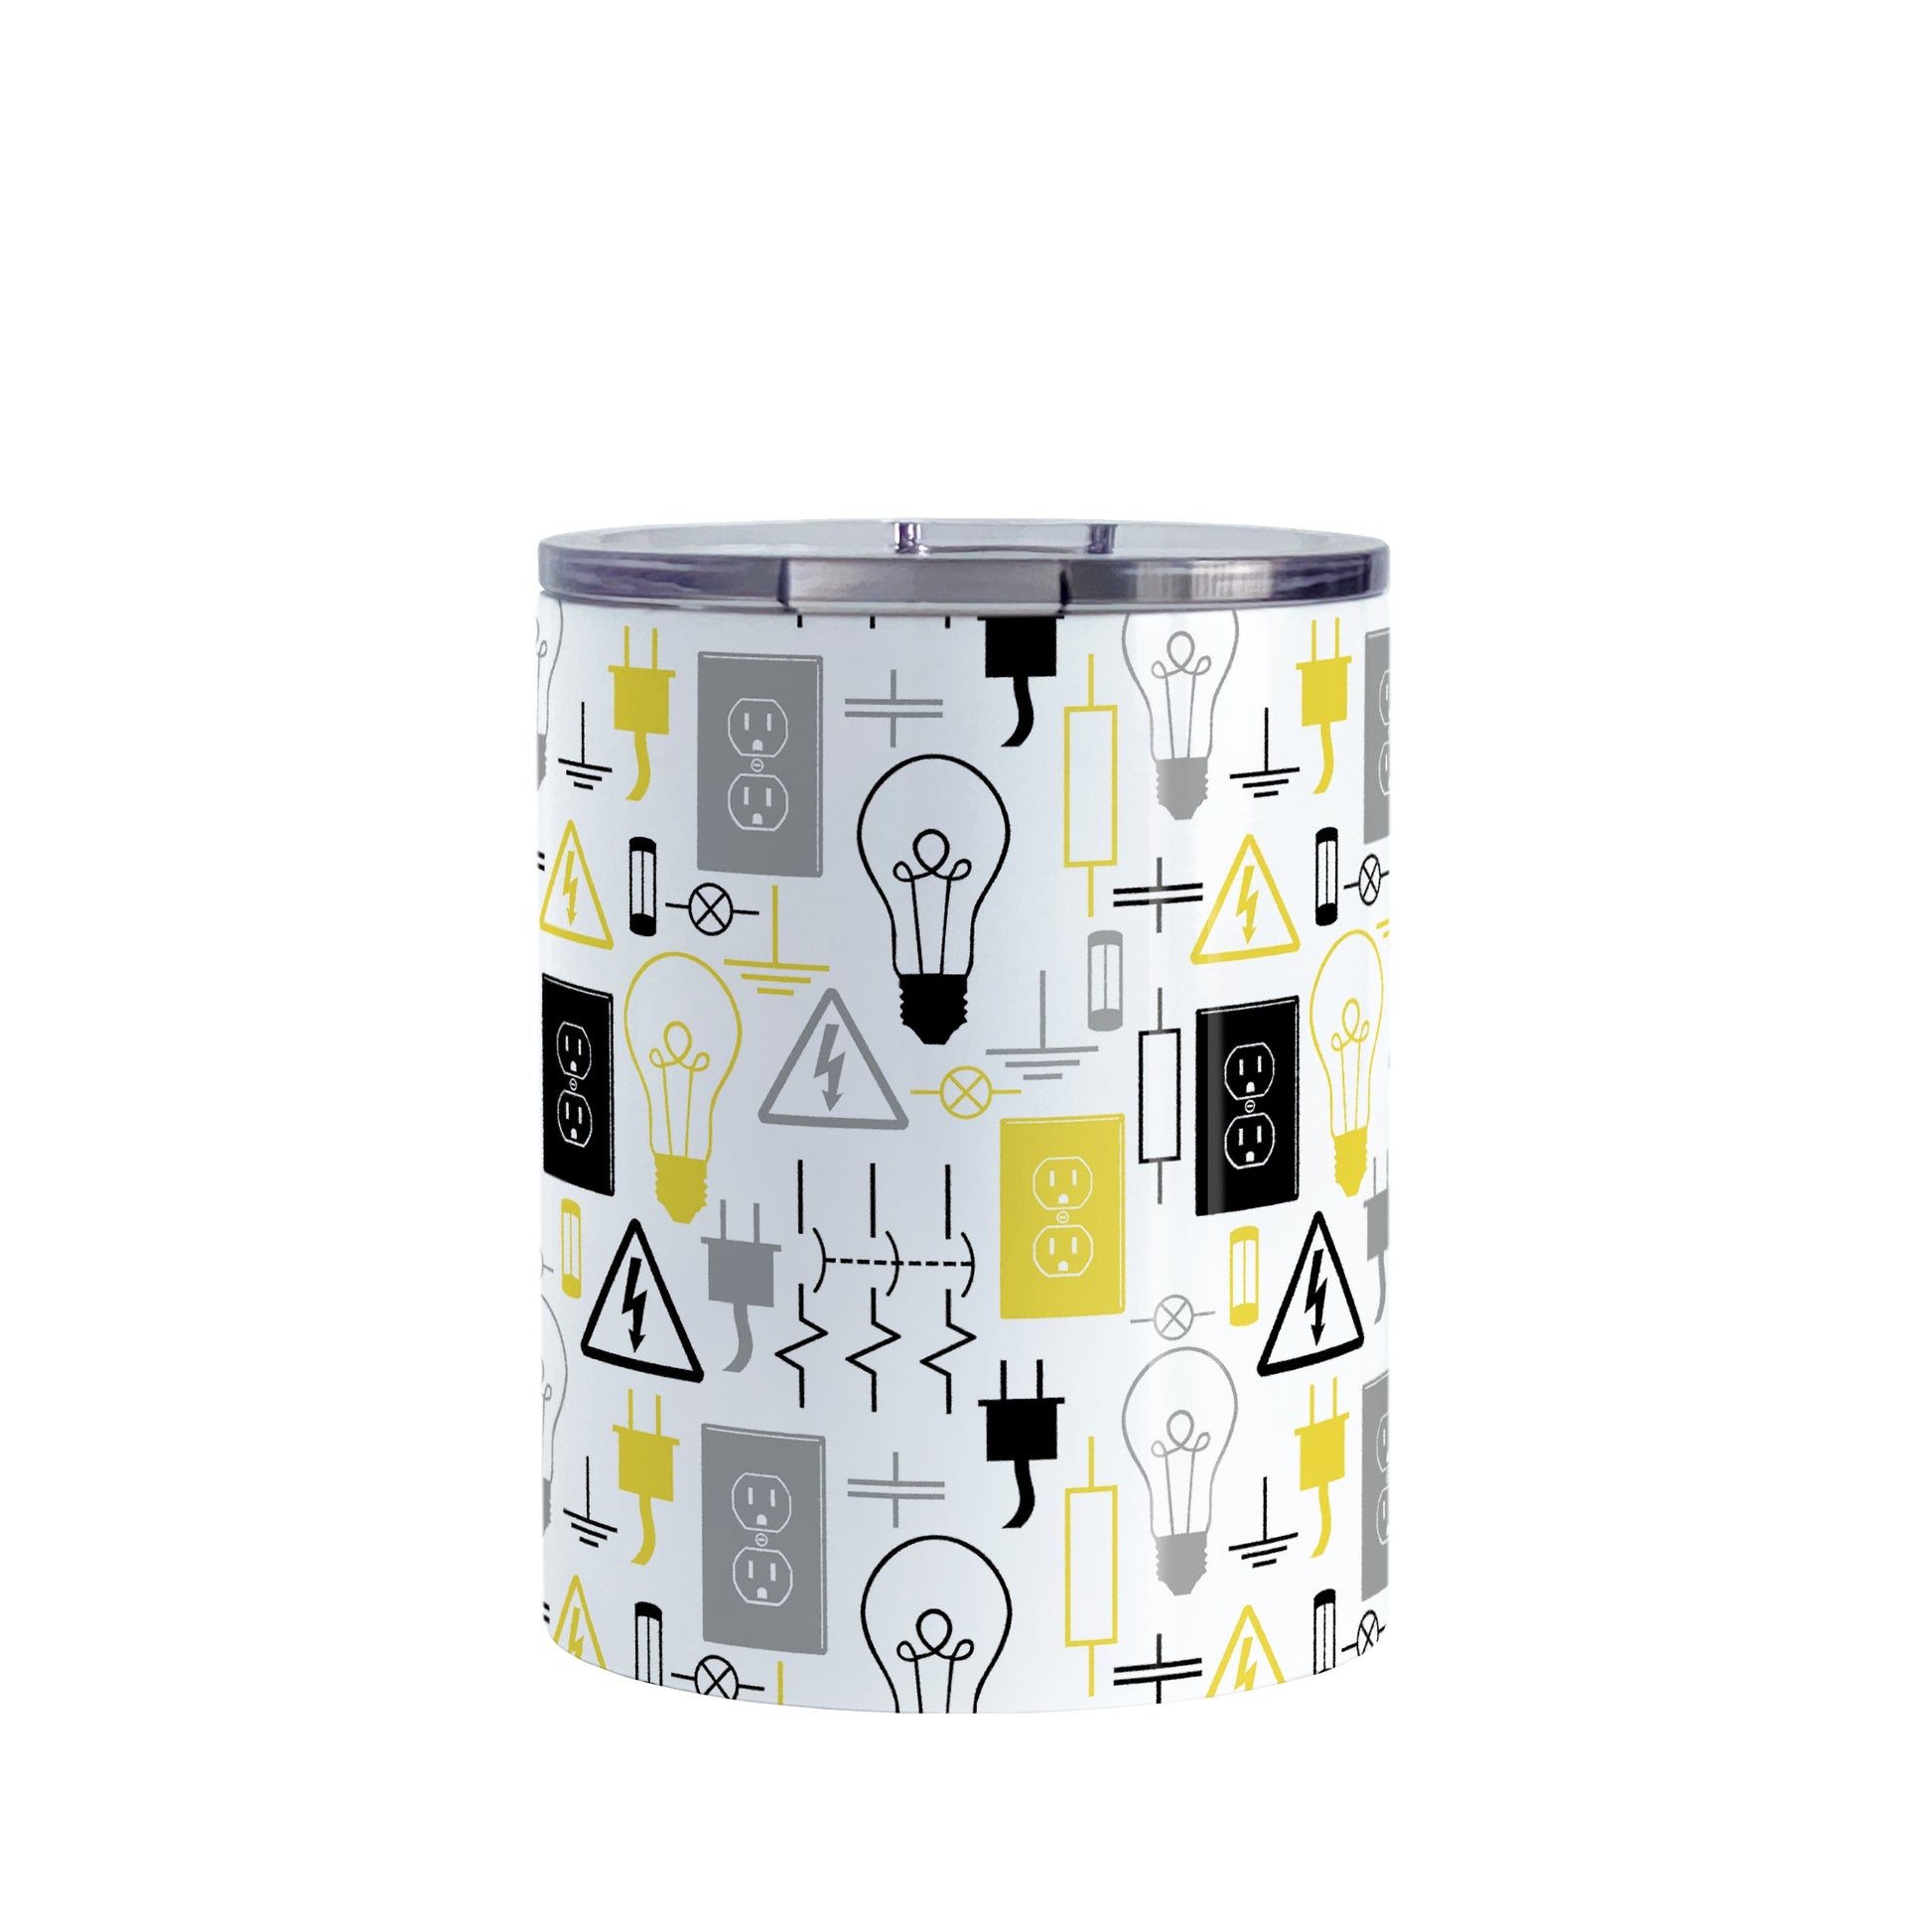 Yellow Electrical Electrician Tumbler Cup (10oz) at Amy's Coffee Mugs. A stainless steel insulated tumbler cup designed with an electrical pattern with light bulbs, wall sockets, plugs, fuses, and other electricity symbols in yellow, gray, and black colors that wraps around the cup. This cup is perfect for people who work a trade as an electrician, love working with electronics, and working in electrical engineering. 